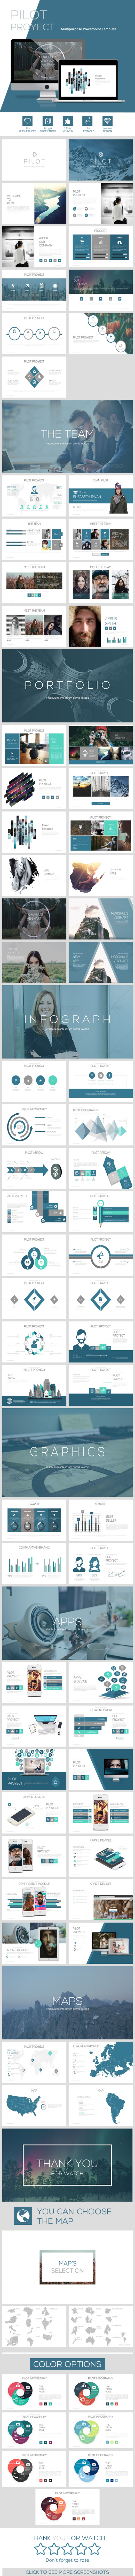 PILOT Proyect powerpoint template